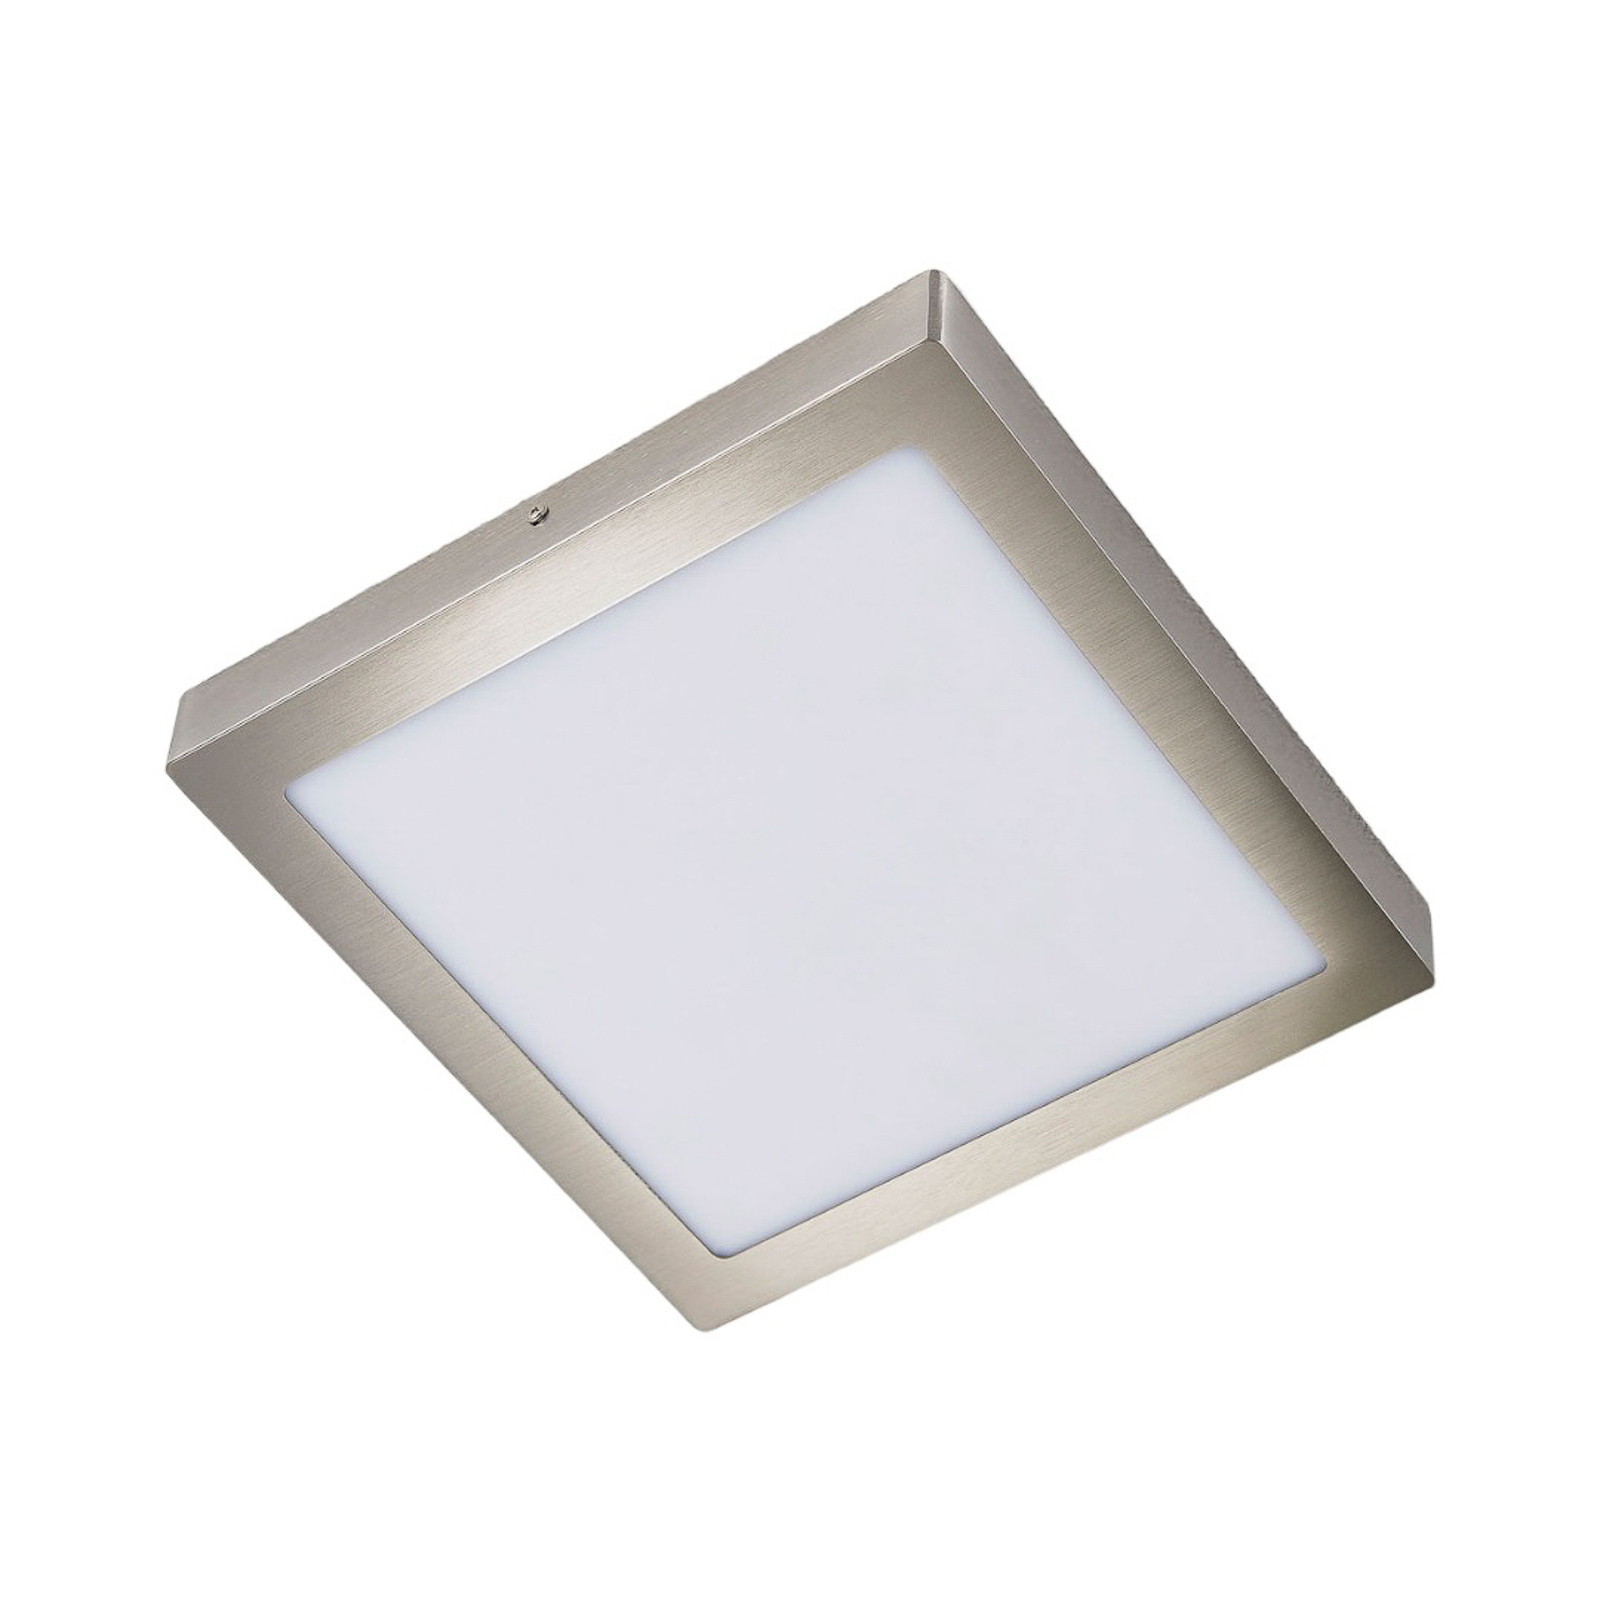 Elice - ceiling light with bright LEDs